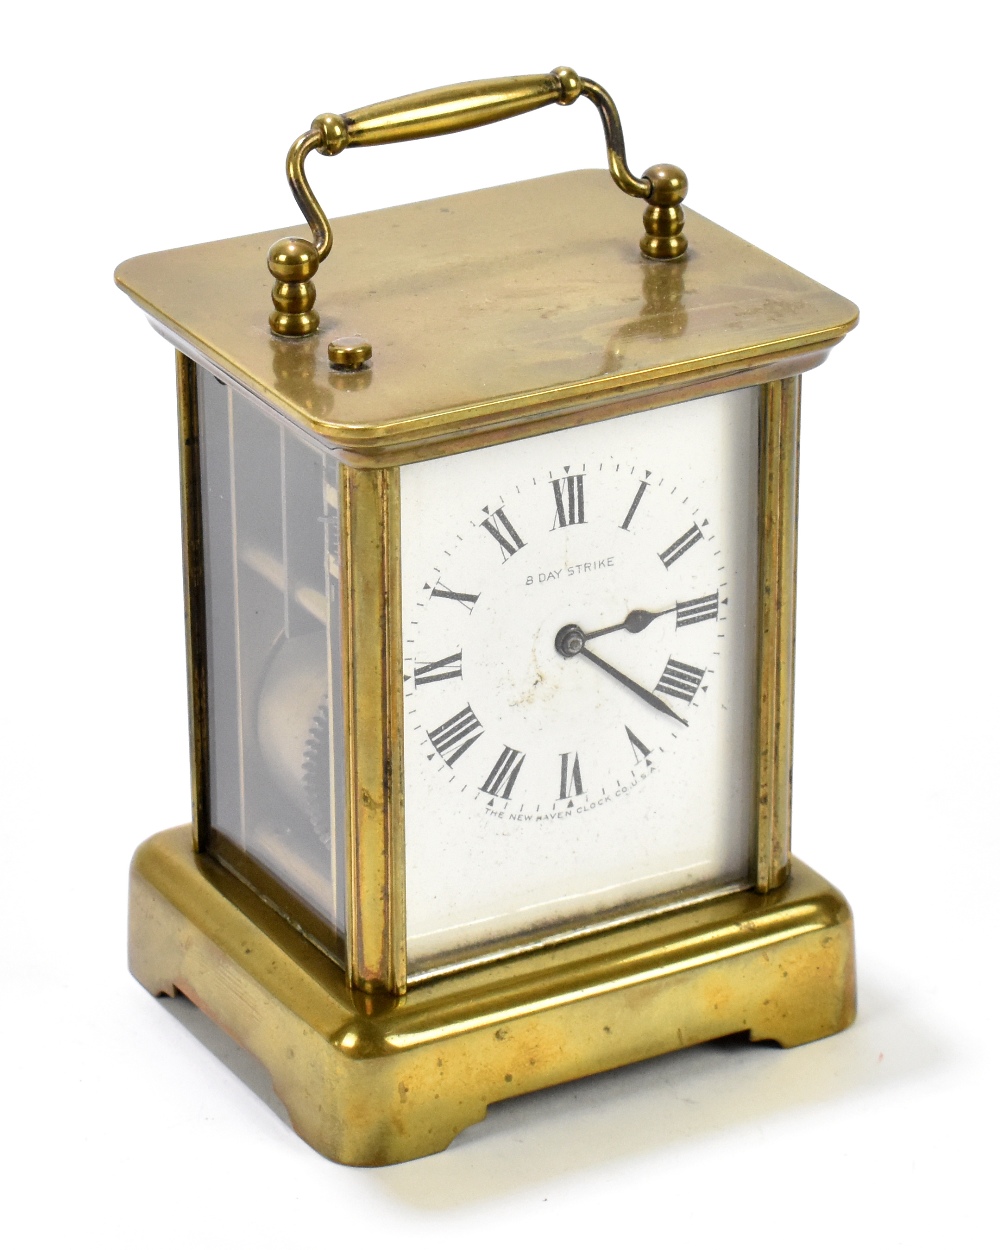 THE NEW HAVEN CLOCK COMPANY USA; an eight day brass cased carriage clock, the enamel dial set with